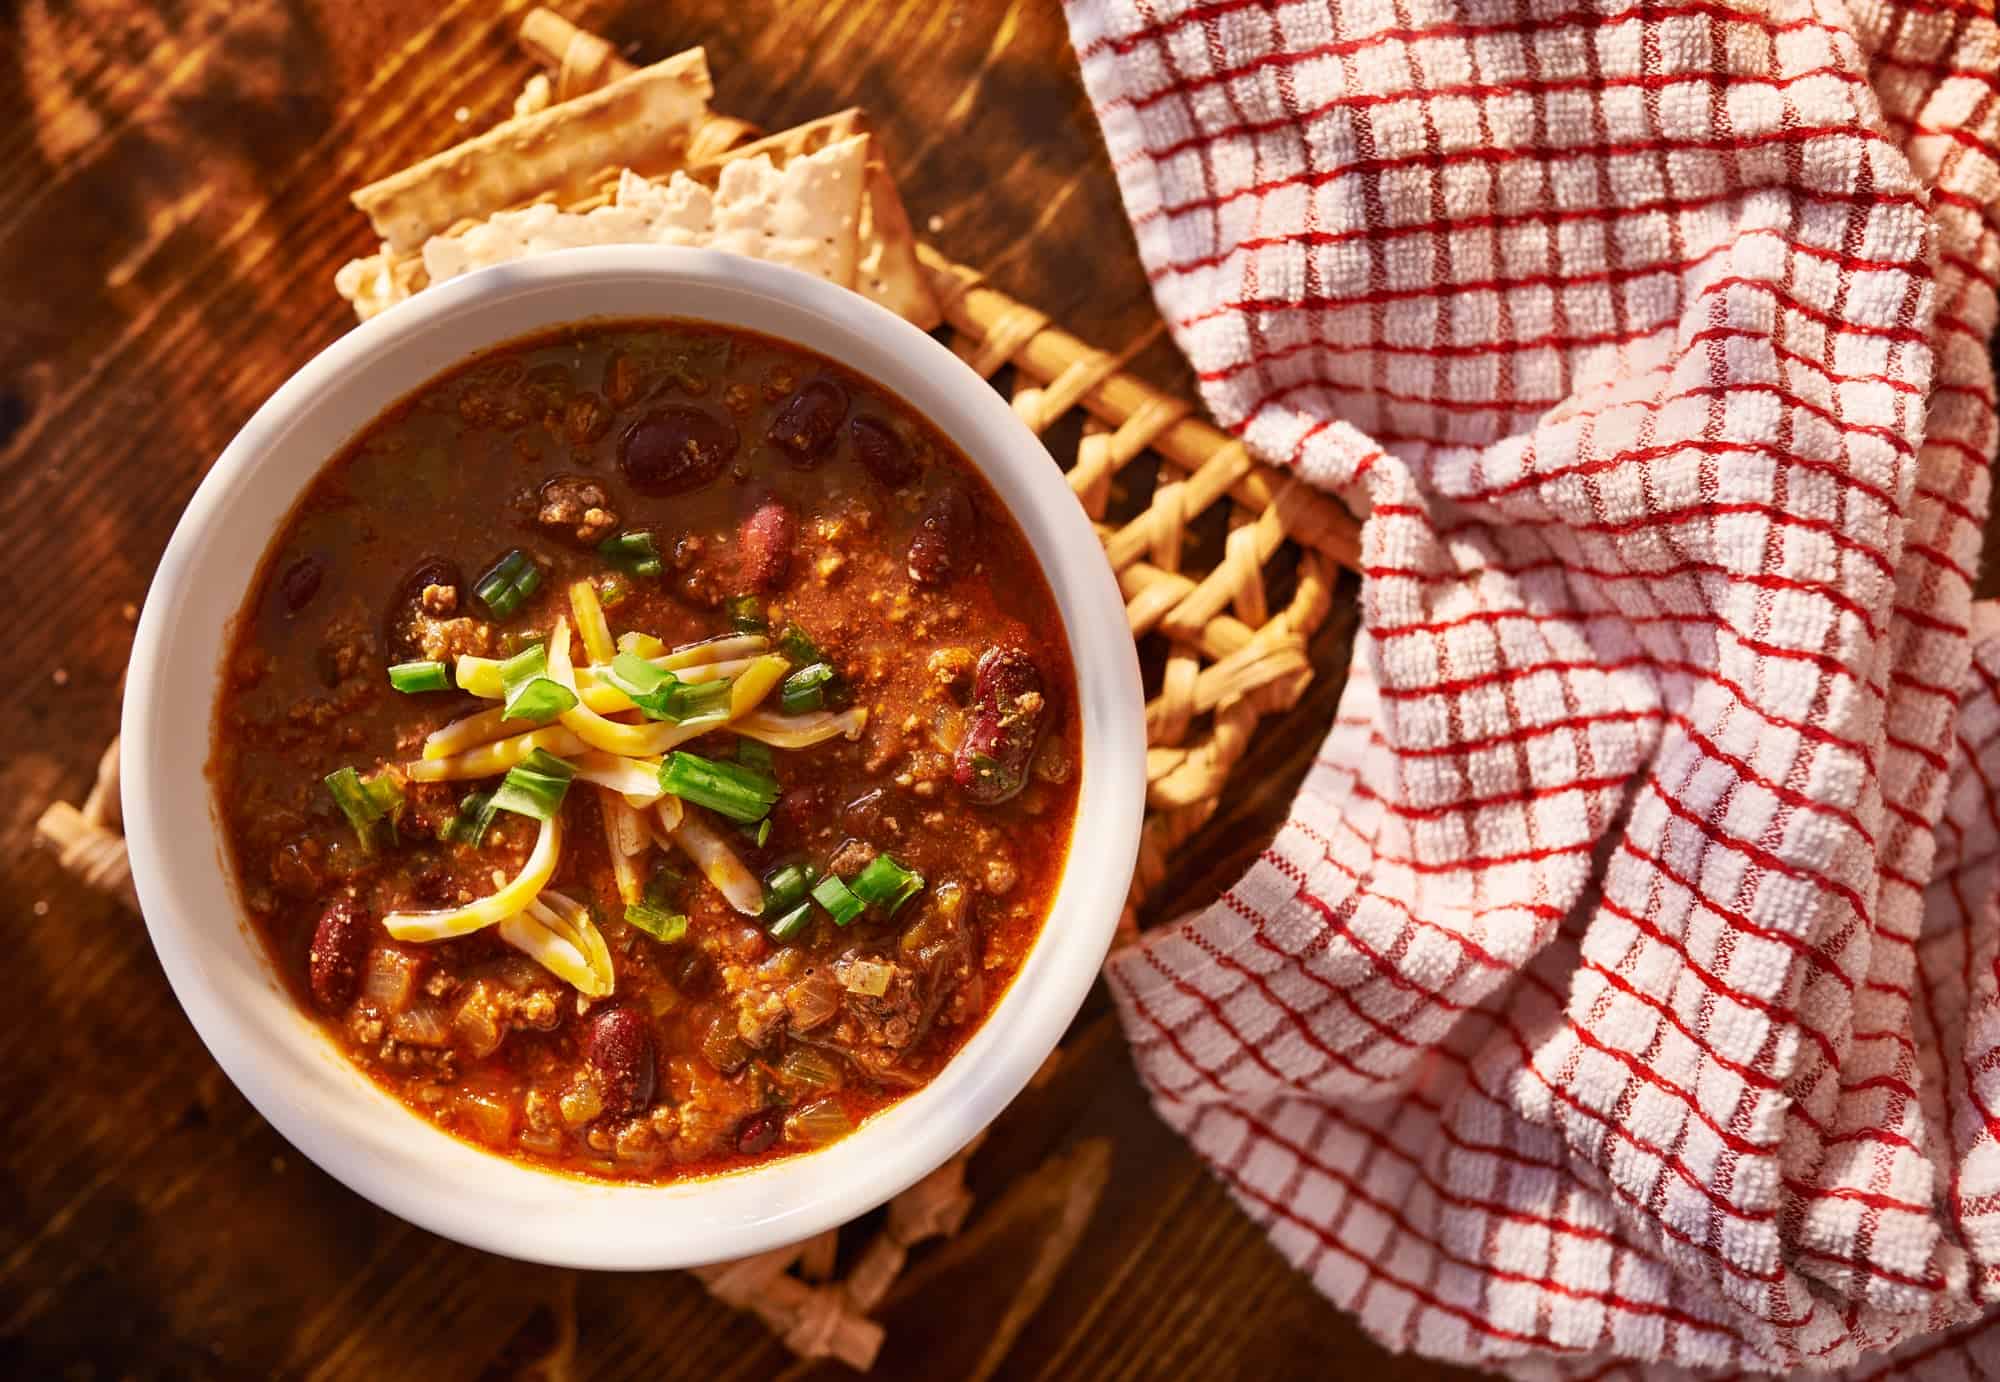 Our bean chili is simple to make in the crock pot and takes incredible. Get the recipe and more helpful tips at Made in a Pinch and follow us on Pinterest1-min